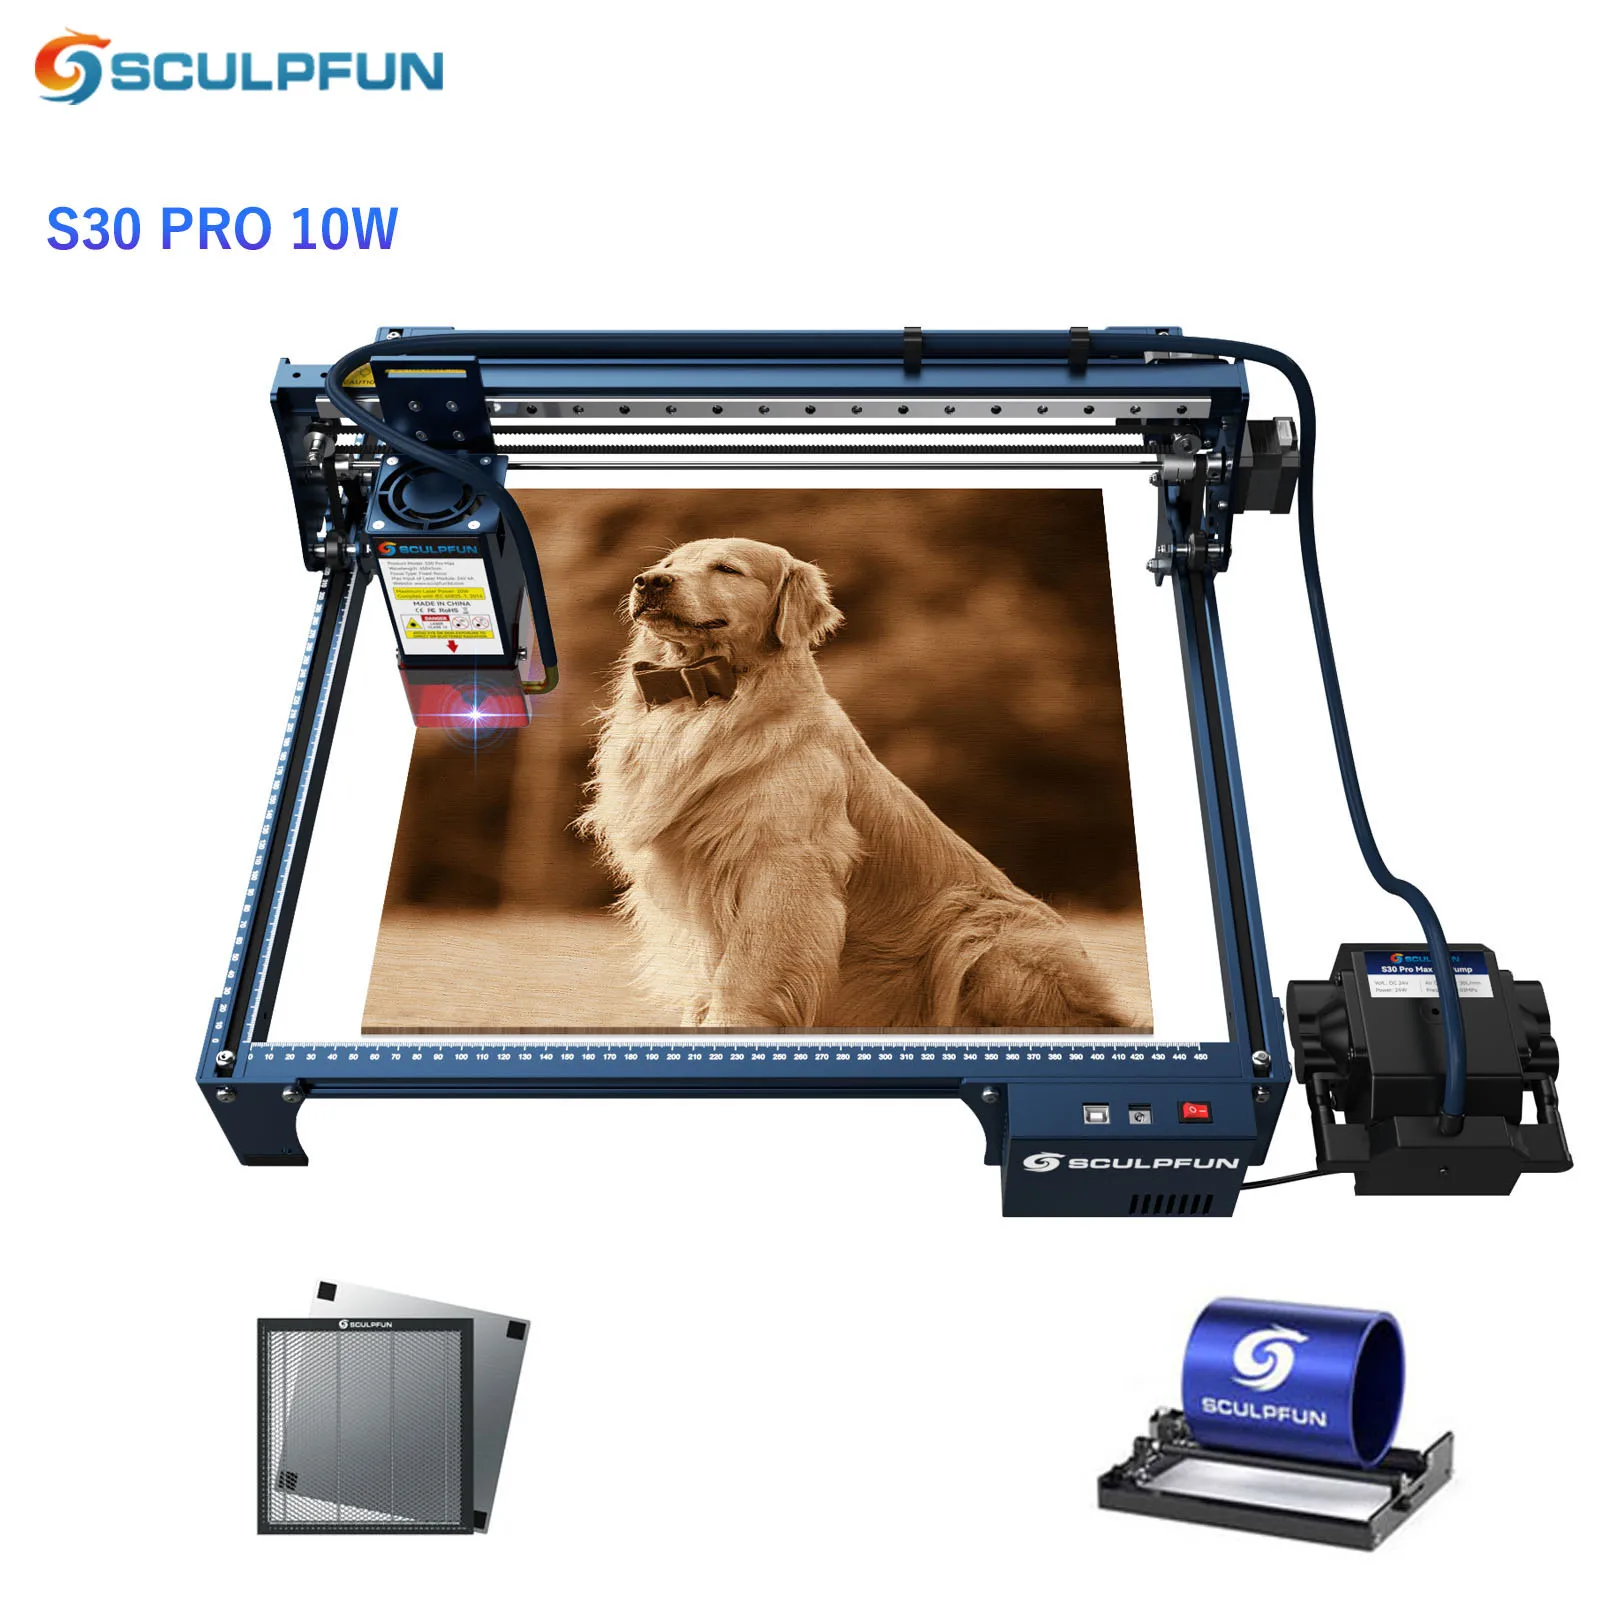 Newest SCULPFUN S30 PRO Laser Engraver Set 10W Engraving Machine With 32-bit Automatic Air-assist Motherboard And Air Pump